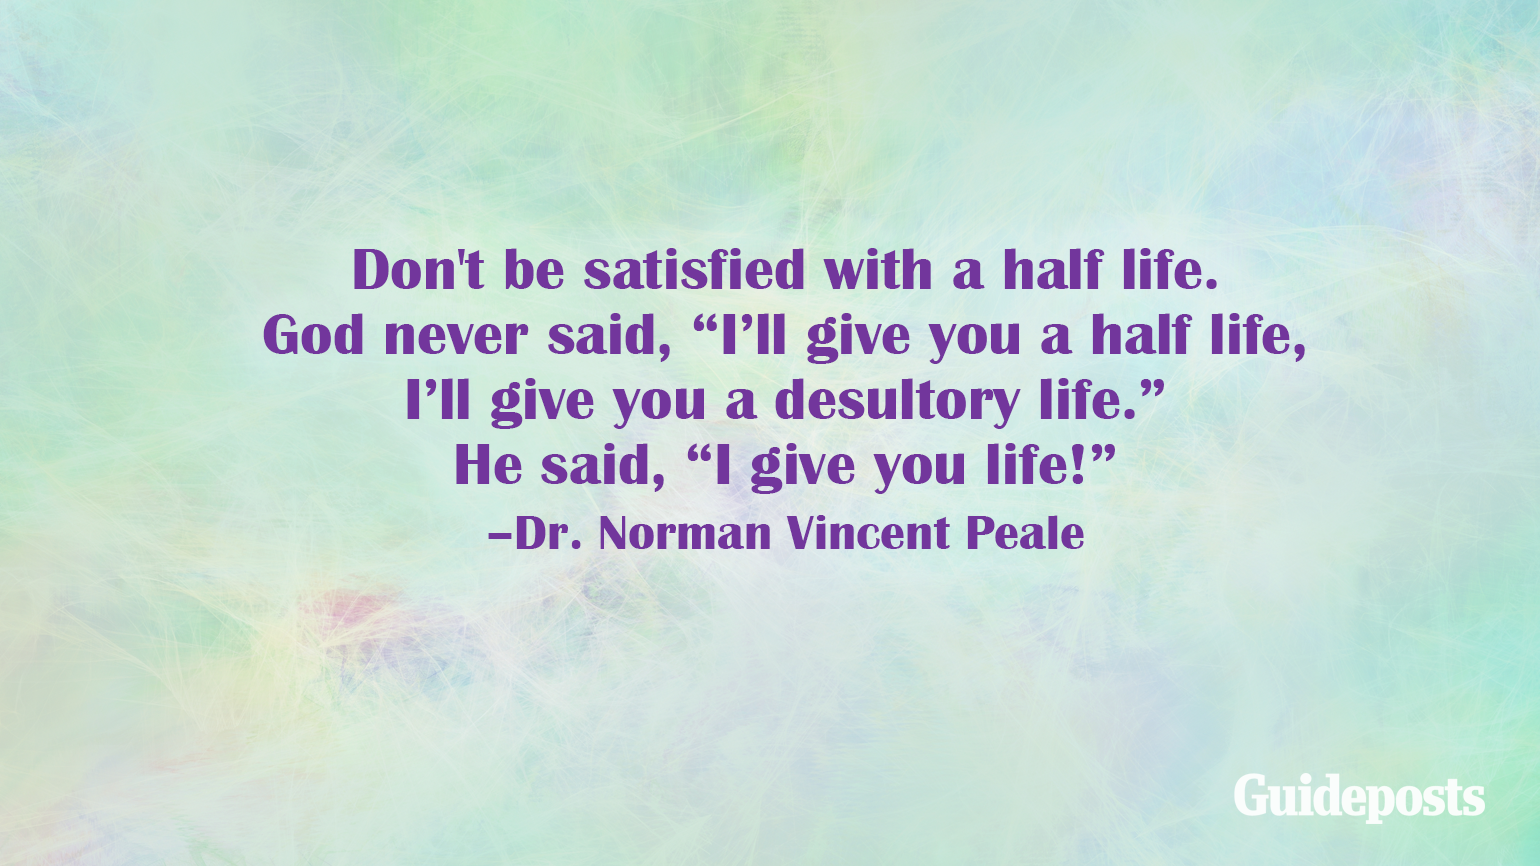 Don't be satisfied with a half life. God never said, "I'll give you a half life, I'll give you a desultory life." He said, "I give you life!” –Dr. Norman Vincent Peale